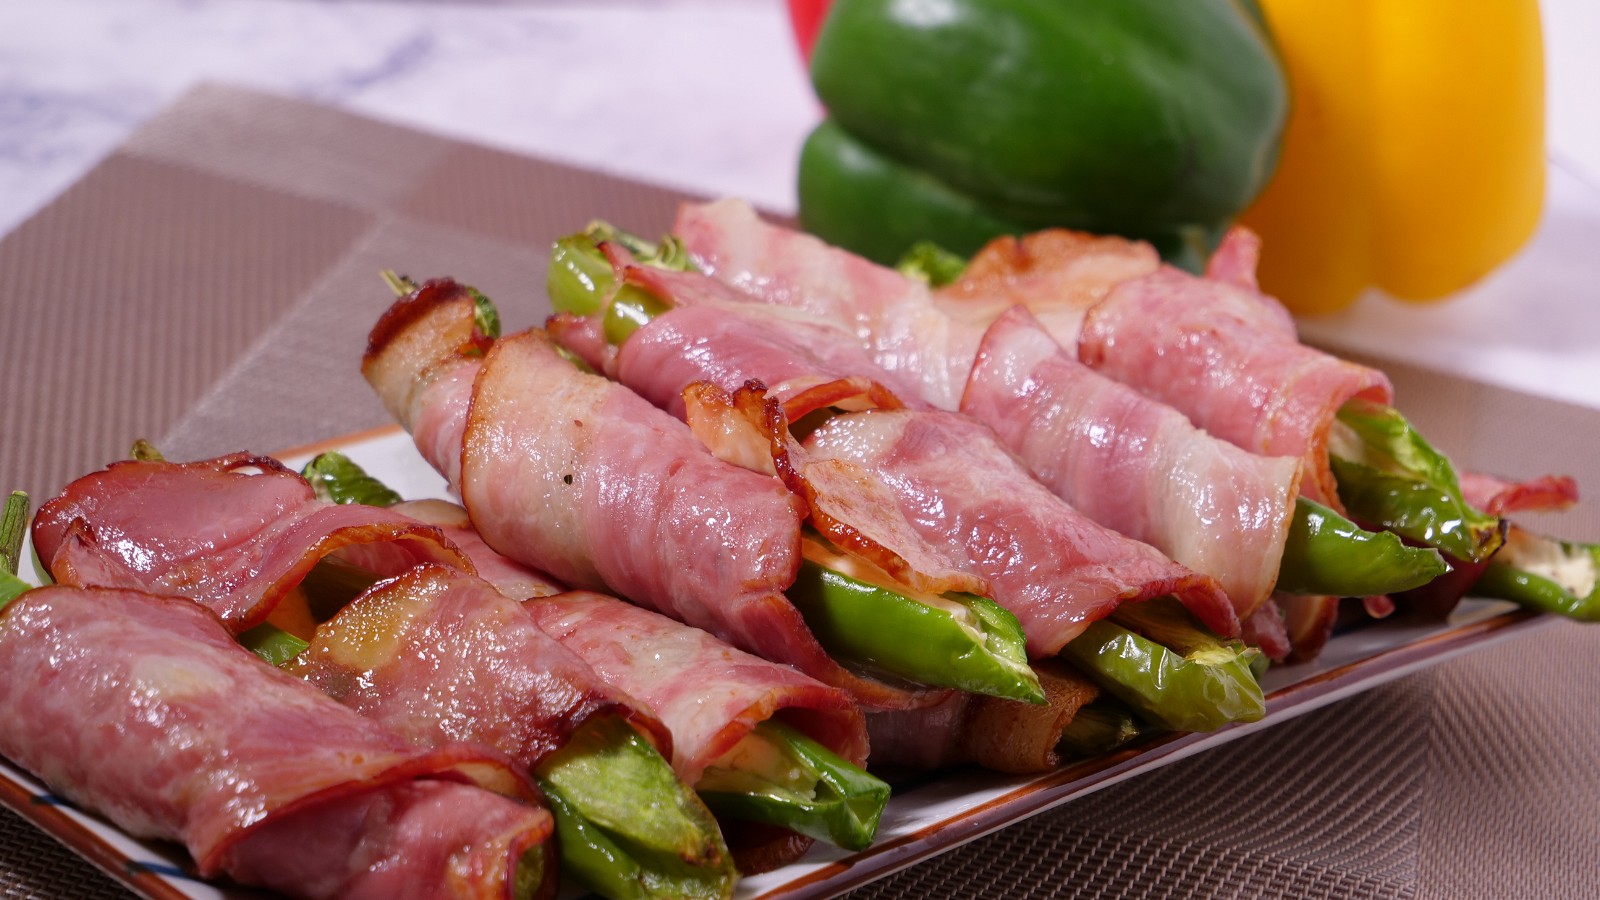 Image of Bacon-Wrapped Jalapeño Poppers in Air fryer